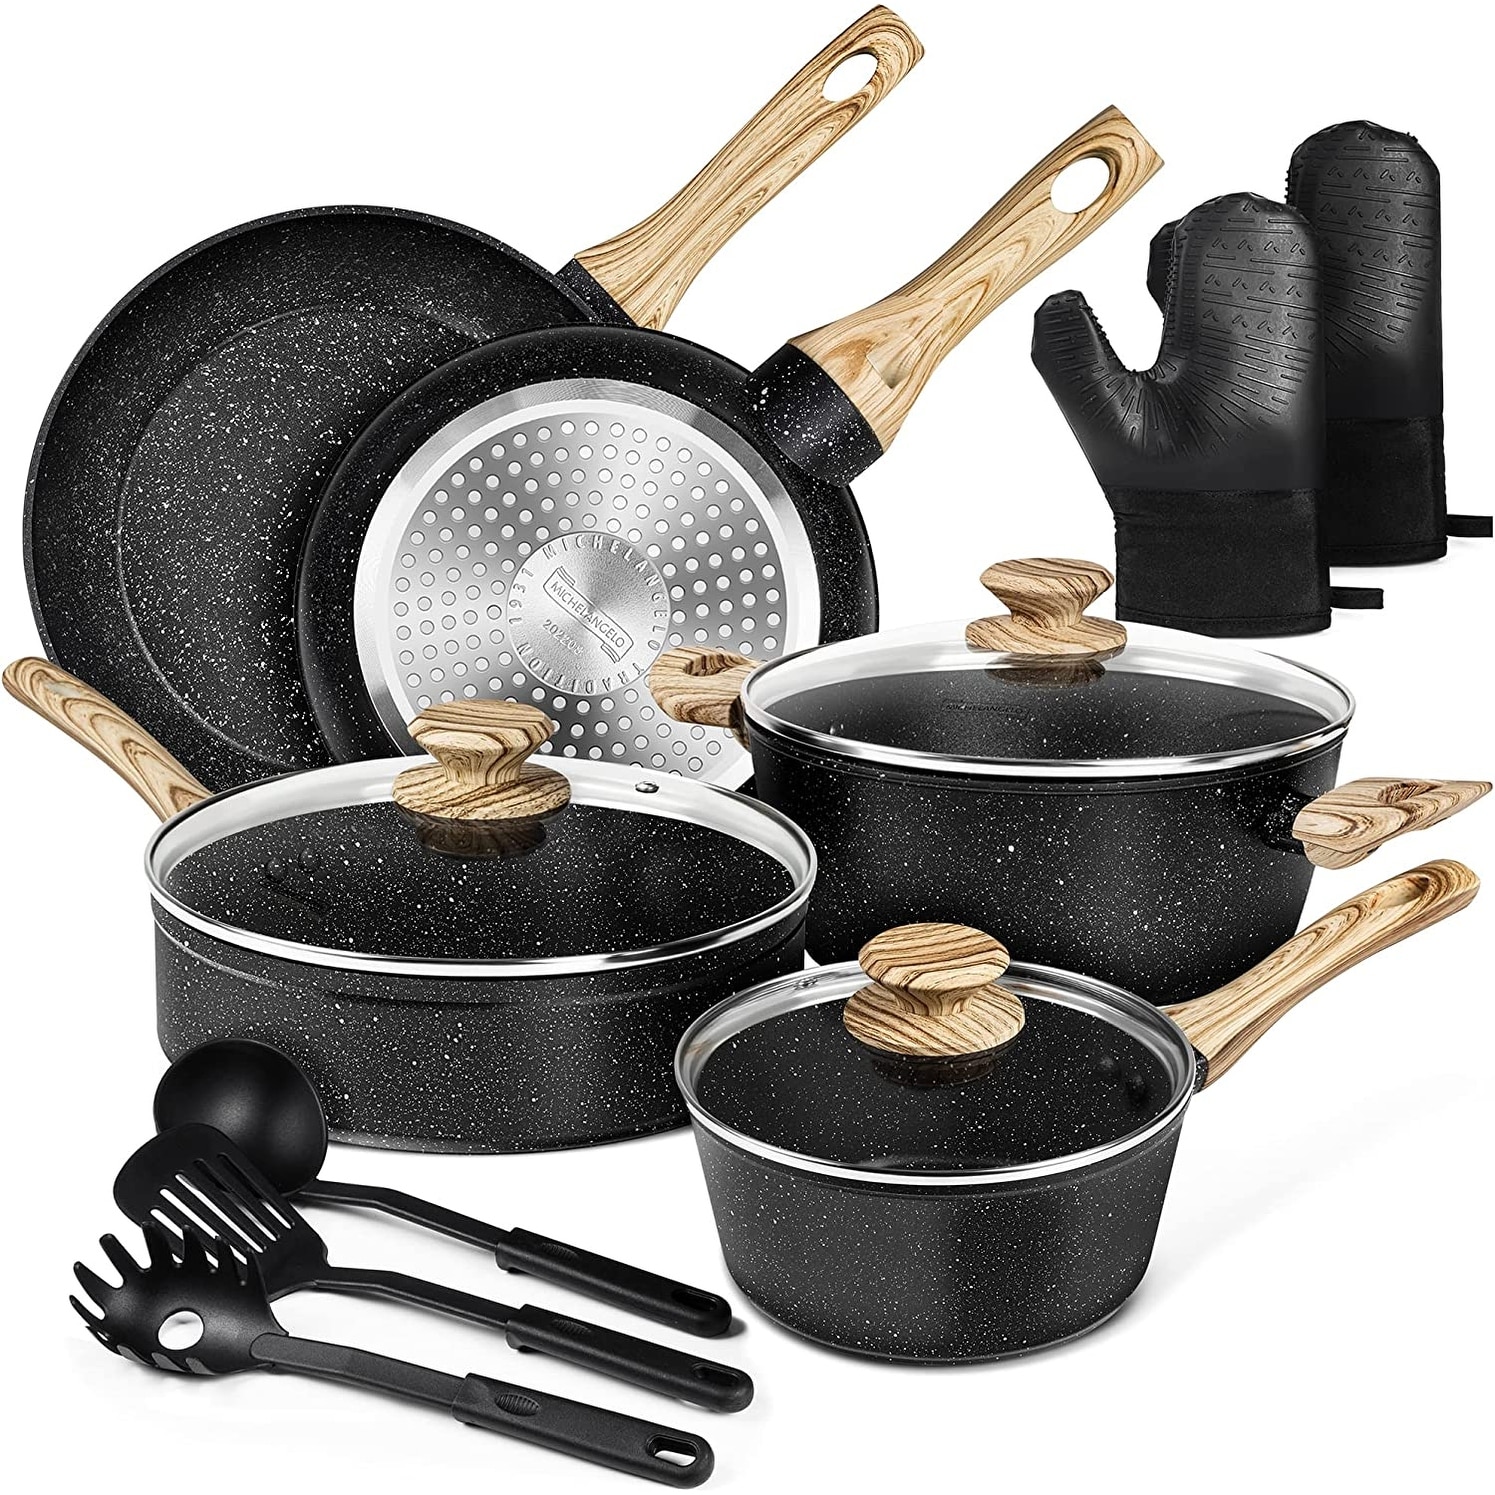 https://ak1.ostkcdn.com/images/products/is/images/direct/26852d21825f67c353c91334b0950100ad3e7b7e/White-Pots-and-Pans-Set-Nonstick-Cookware-Sets%2C-12pcs-White-Granite-Cookware-Set-Induction-Compatible.jpg